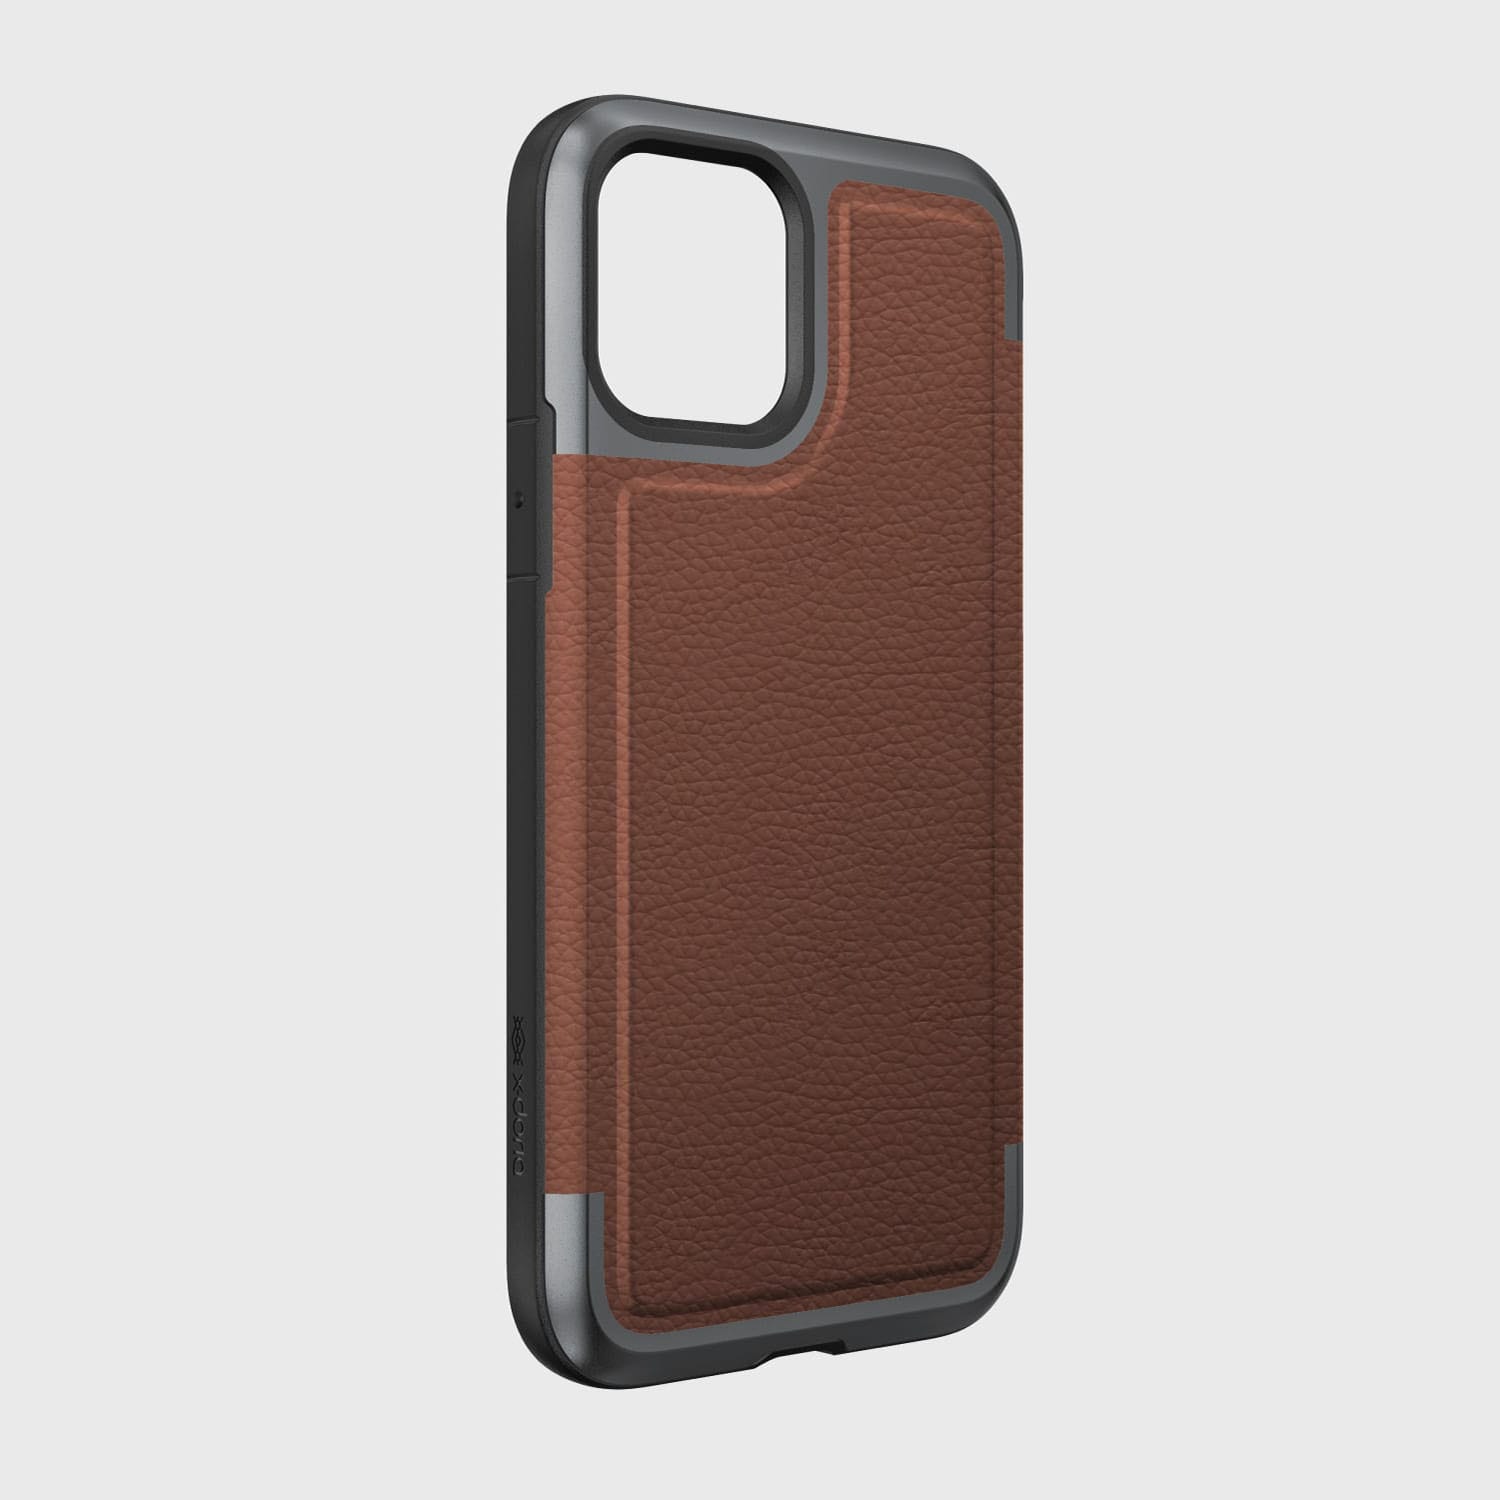 A protective brown leather case for the iPhone 11 Pro, offering drop protection. (Product Name: Raptic iPhone 11 Pro Case - Prime)